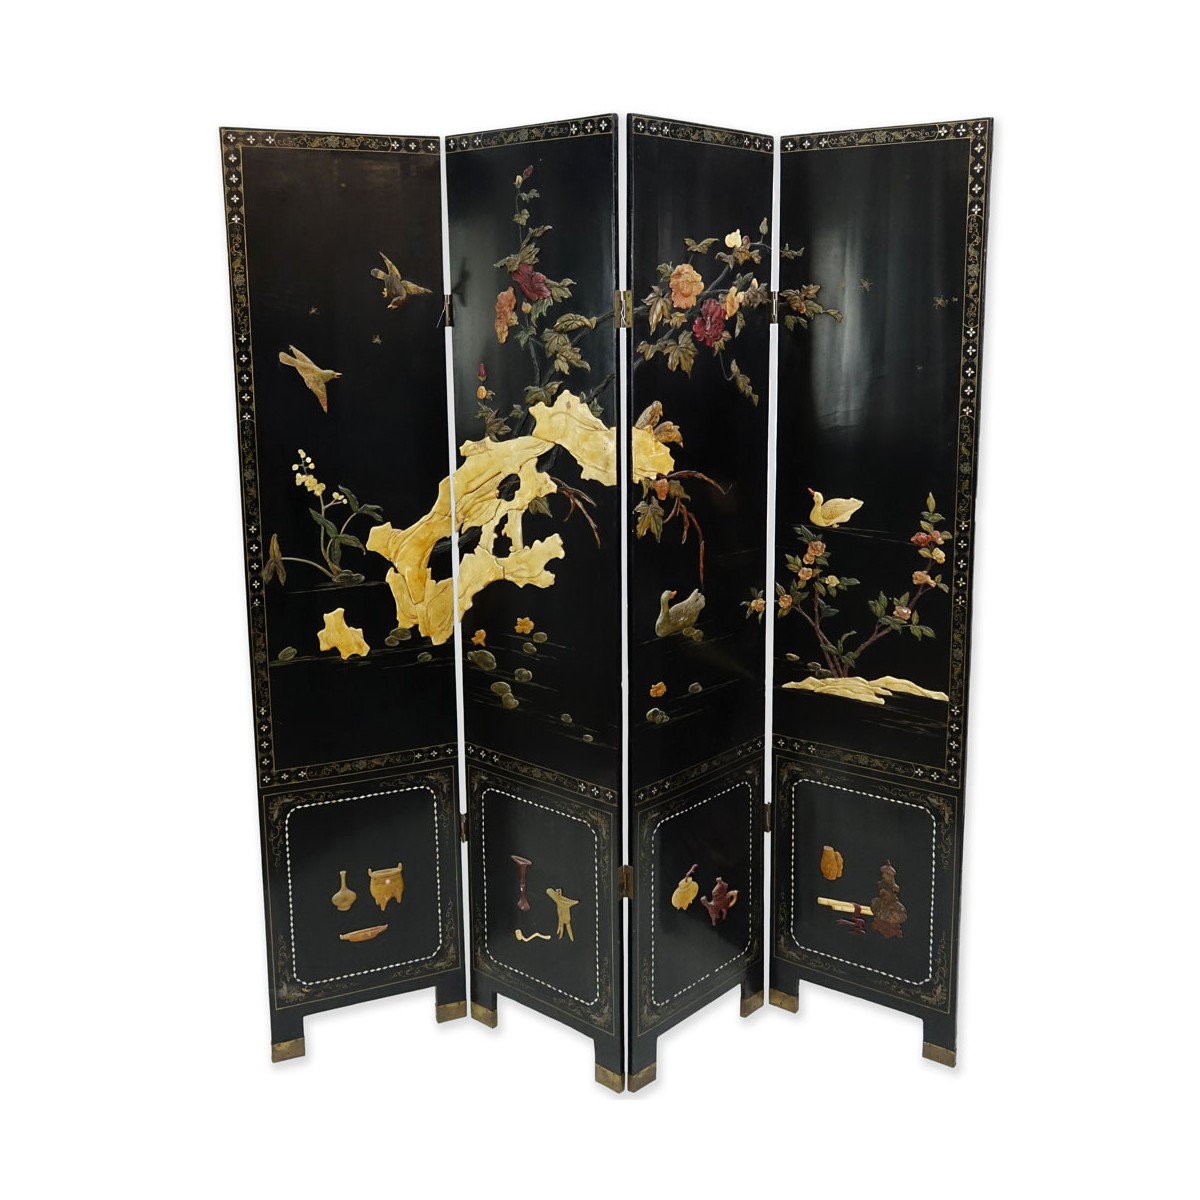 Vintage Mid-Century Chinese Four-Paneled Screen. Enamels, inlaid 